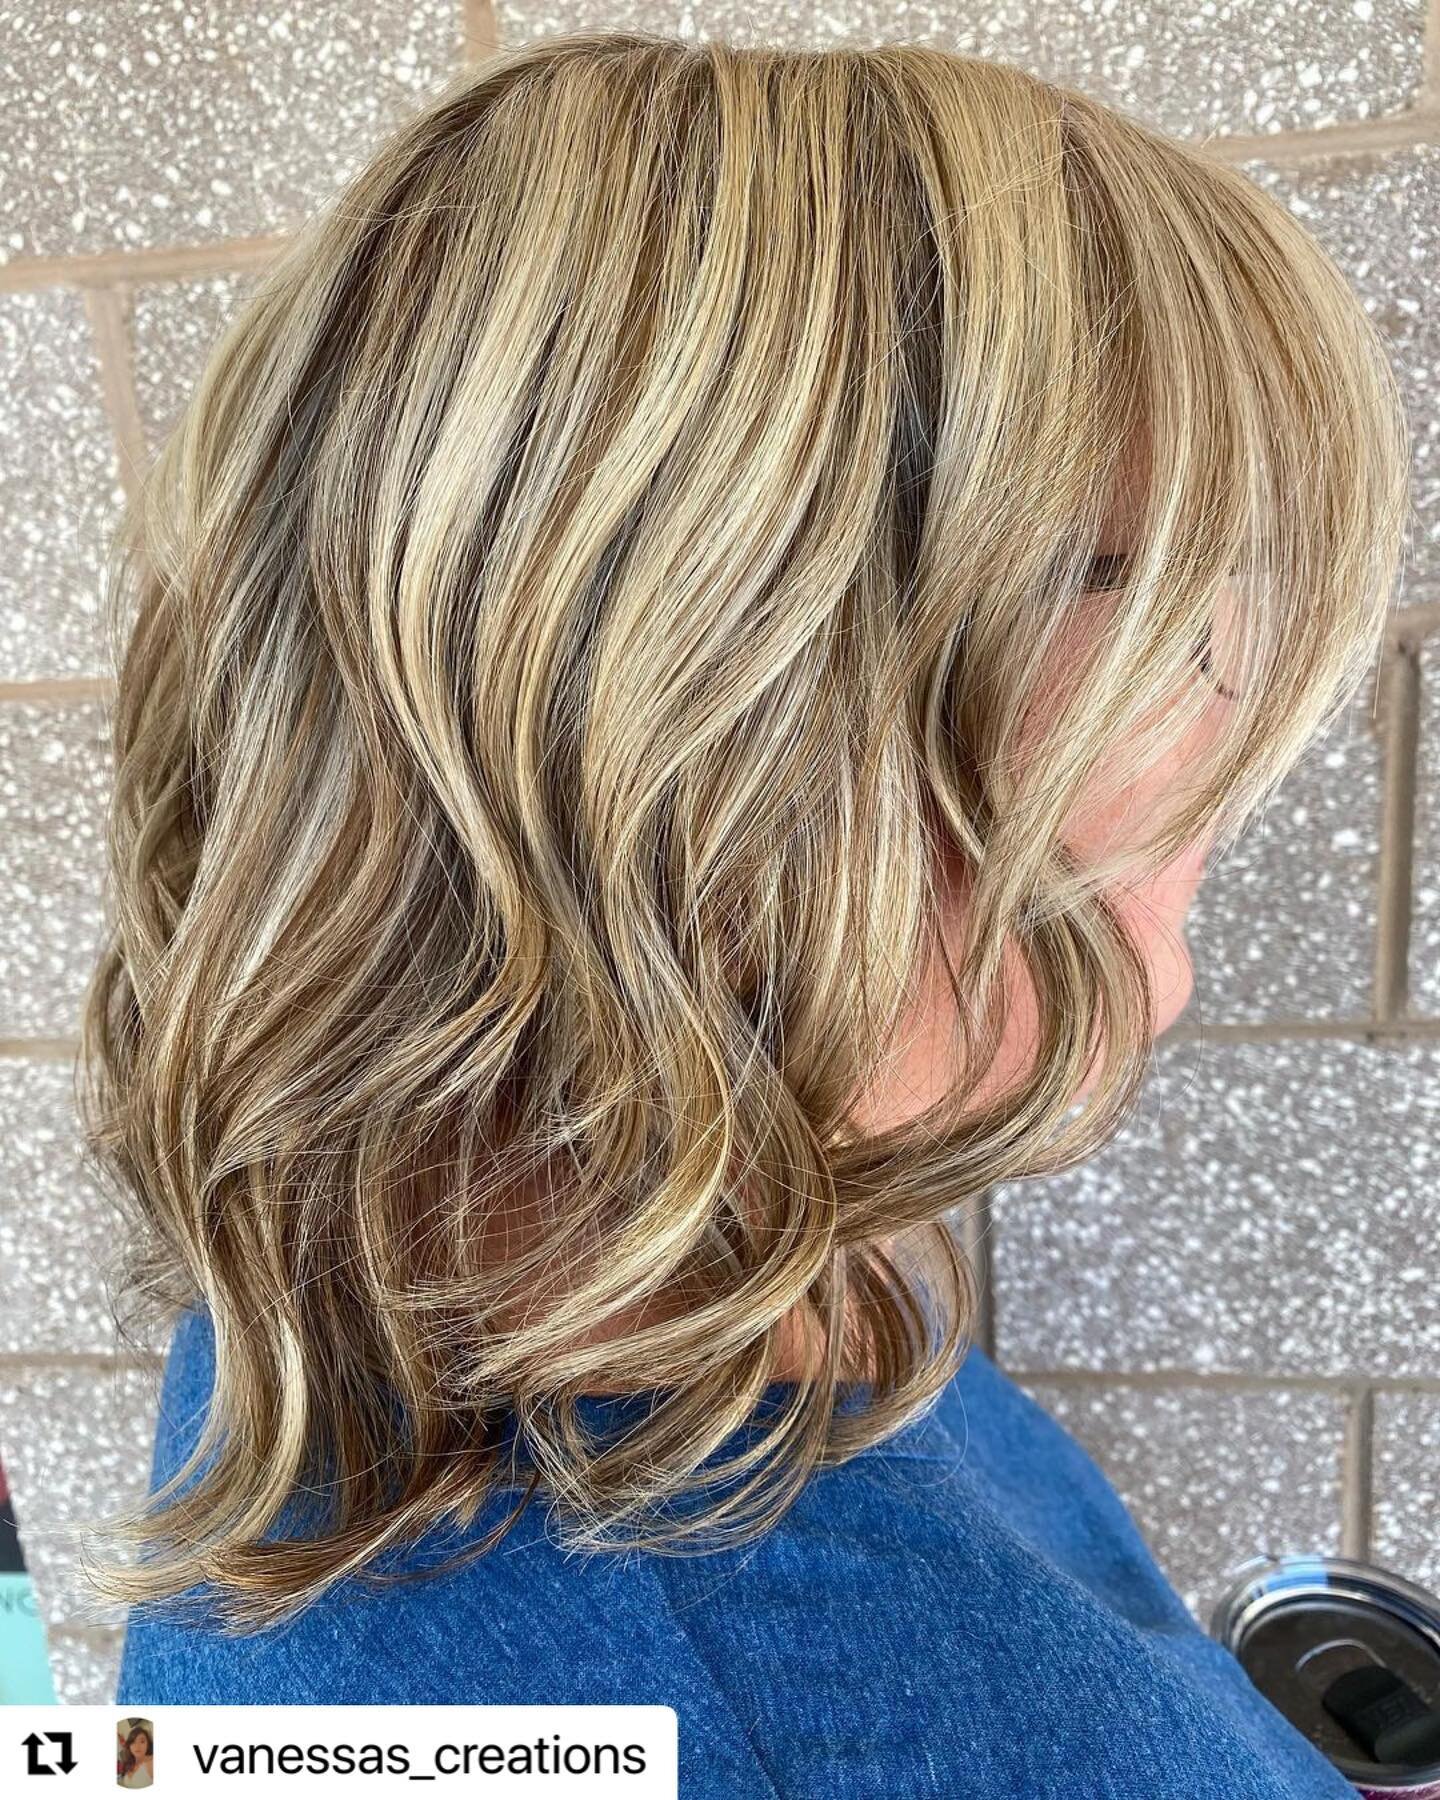 #Repost @vanessas_creations 
・・・
Want to be blonde but still have depth/ dimension ? This is a great solution to that 💁🏼&zwj;♀️✨ #3030 #highlights #lowlights #paulmitchell #paulmitchellpro #pmshines #dimensionalblonde #depth #curls #refresh